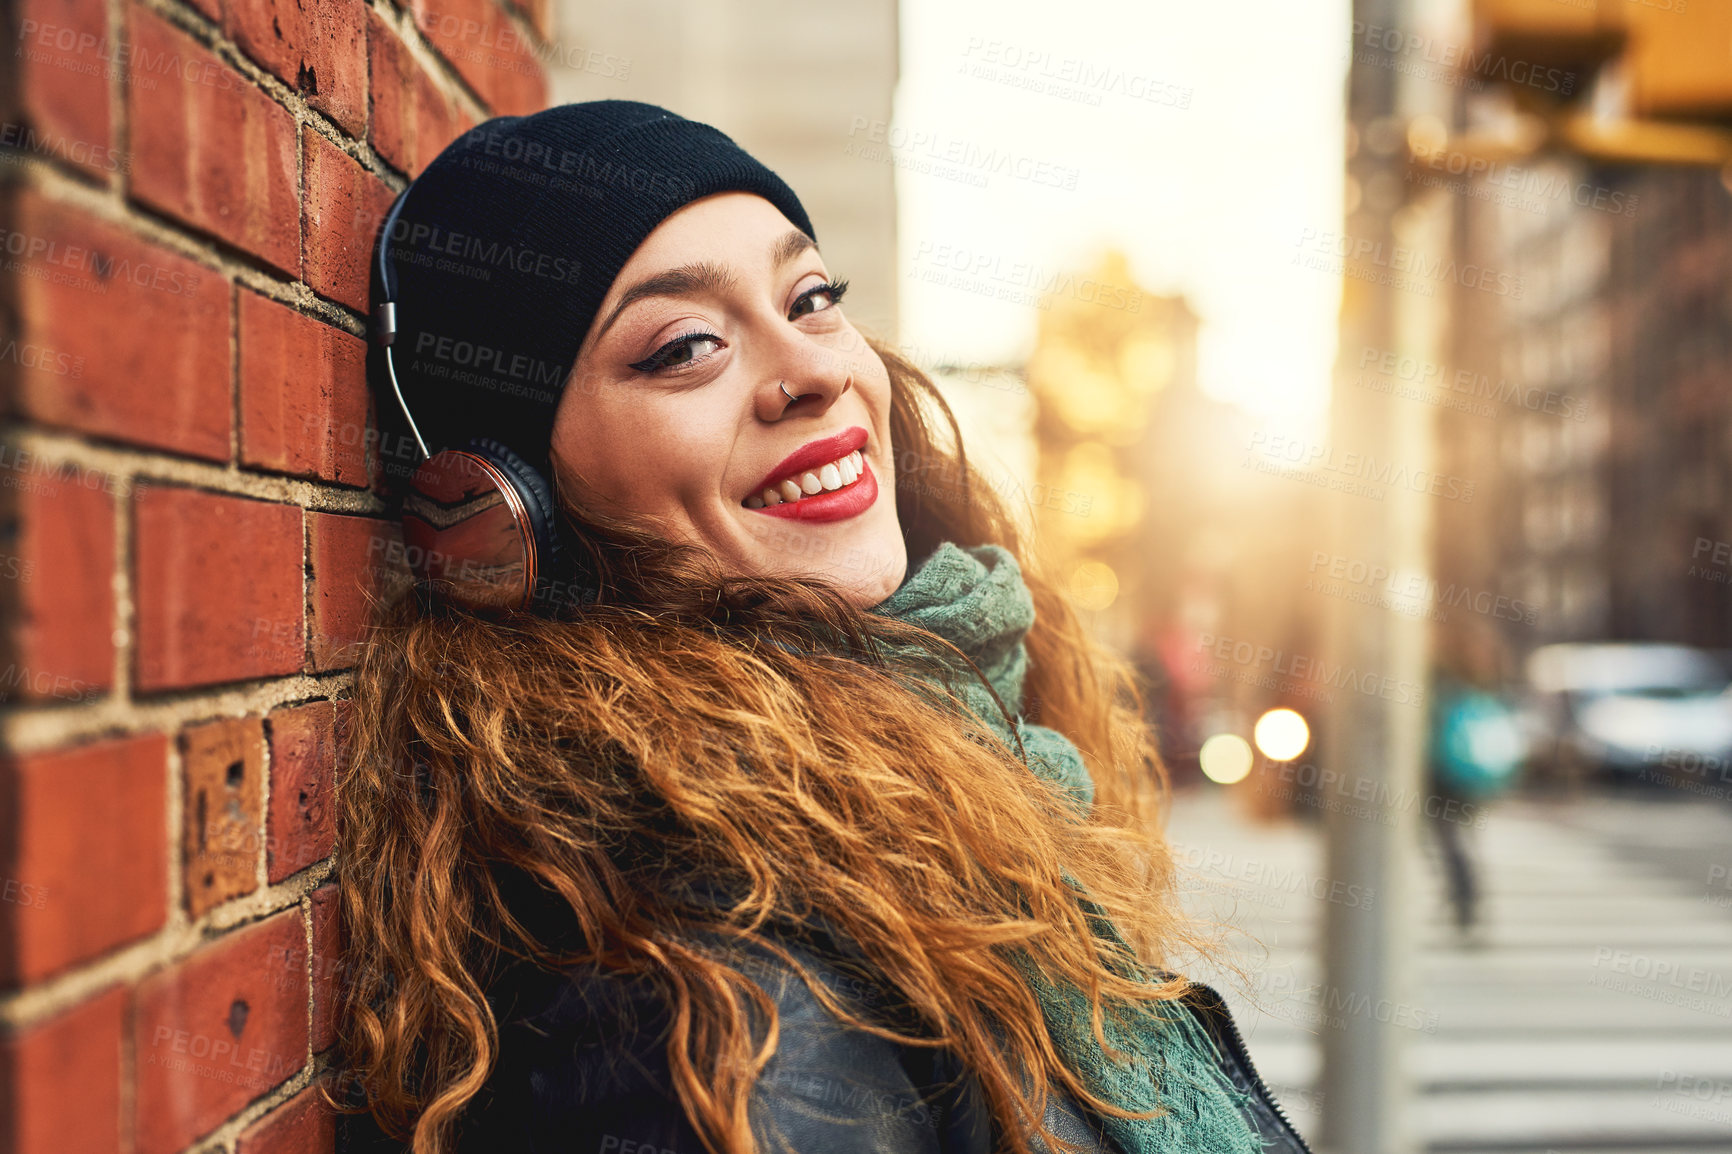 Buy stock photo Cropped shot of a young woman listening to music while leaning against a brick wall outside